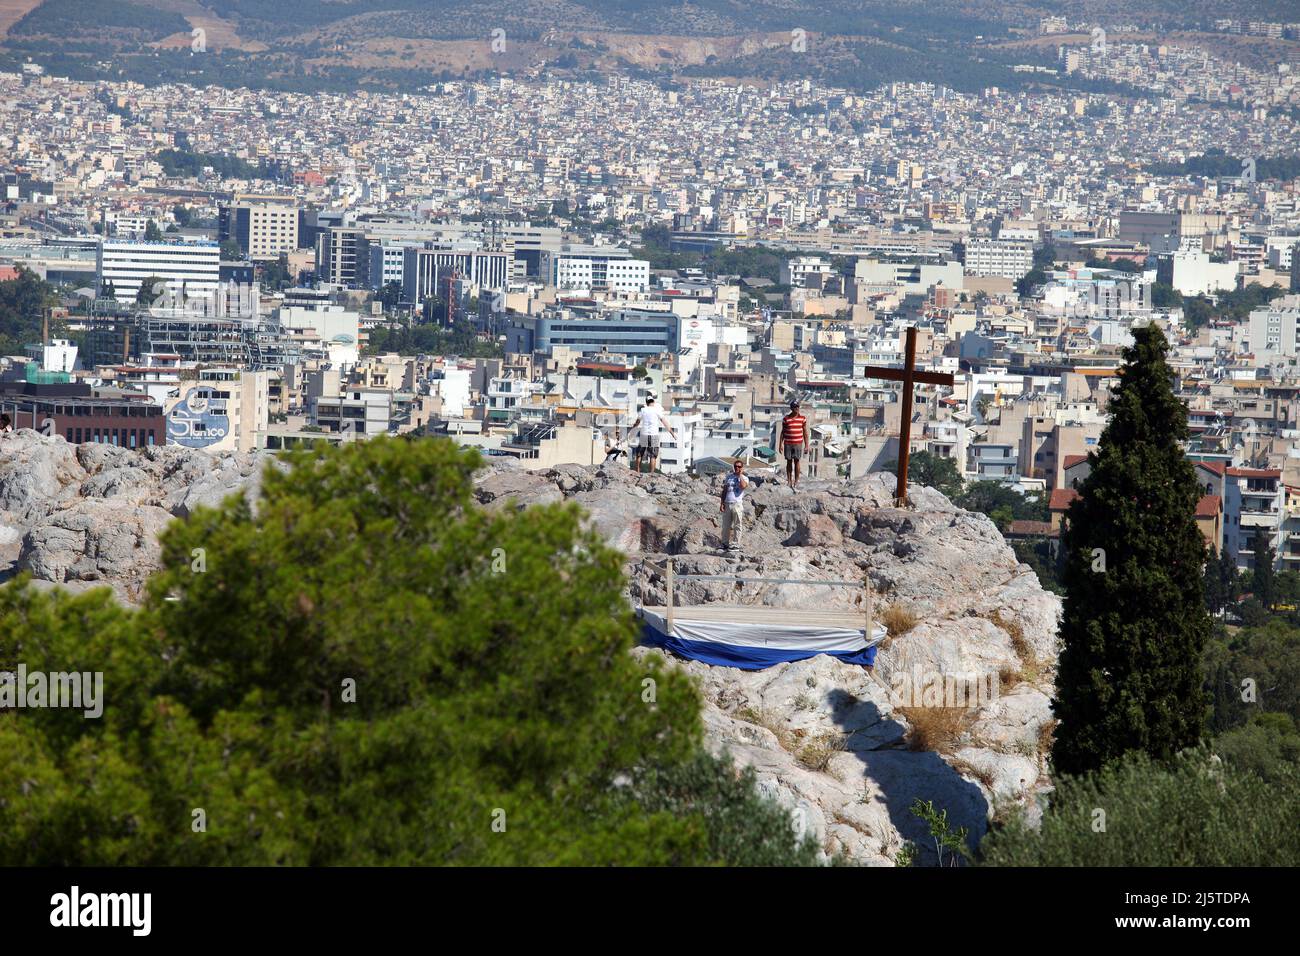 ATHENS, GREECE - JUNE 29: Areopagus (Mars Hill) behind Athens City from Acropolis on June 29, 2012 in Athens, Greece. Mars Hill is a prominent site located 140 feet below the Acropolis. Stock Photo